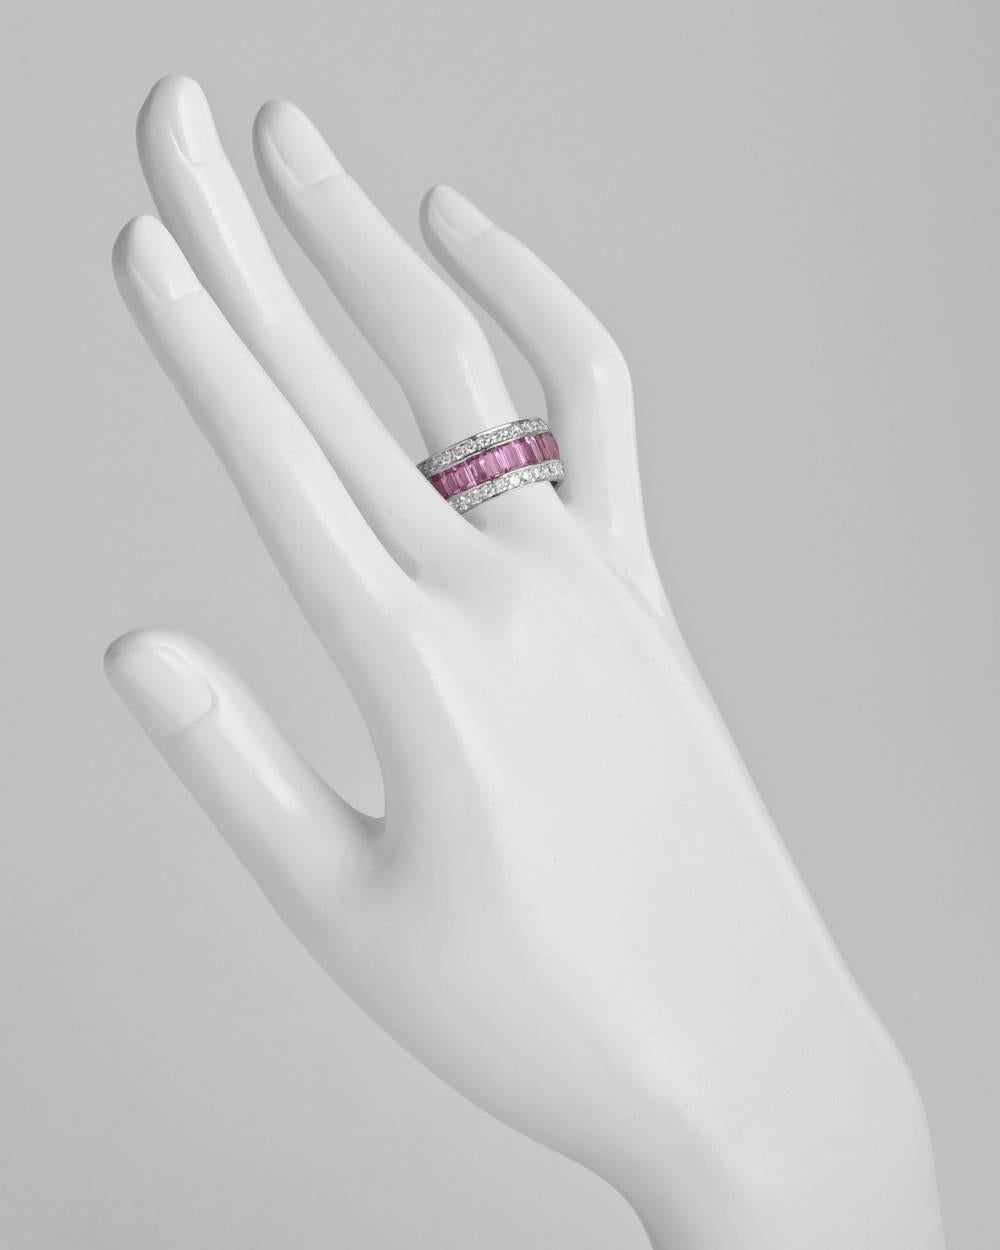 Three-row eternity band, centering a row of larger baguette-cut pink sapphires bordered by round brilliant-cut diamonds, mounted in 18k white gold. Pink sapphires weighing approximately 8.01 total carats and diamonds weighing approximately 1.75